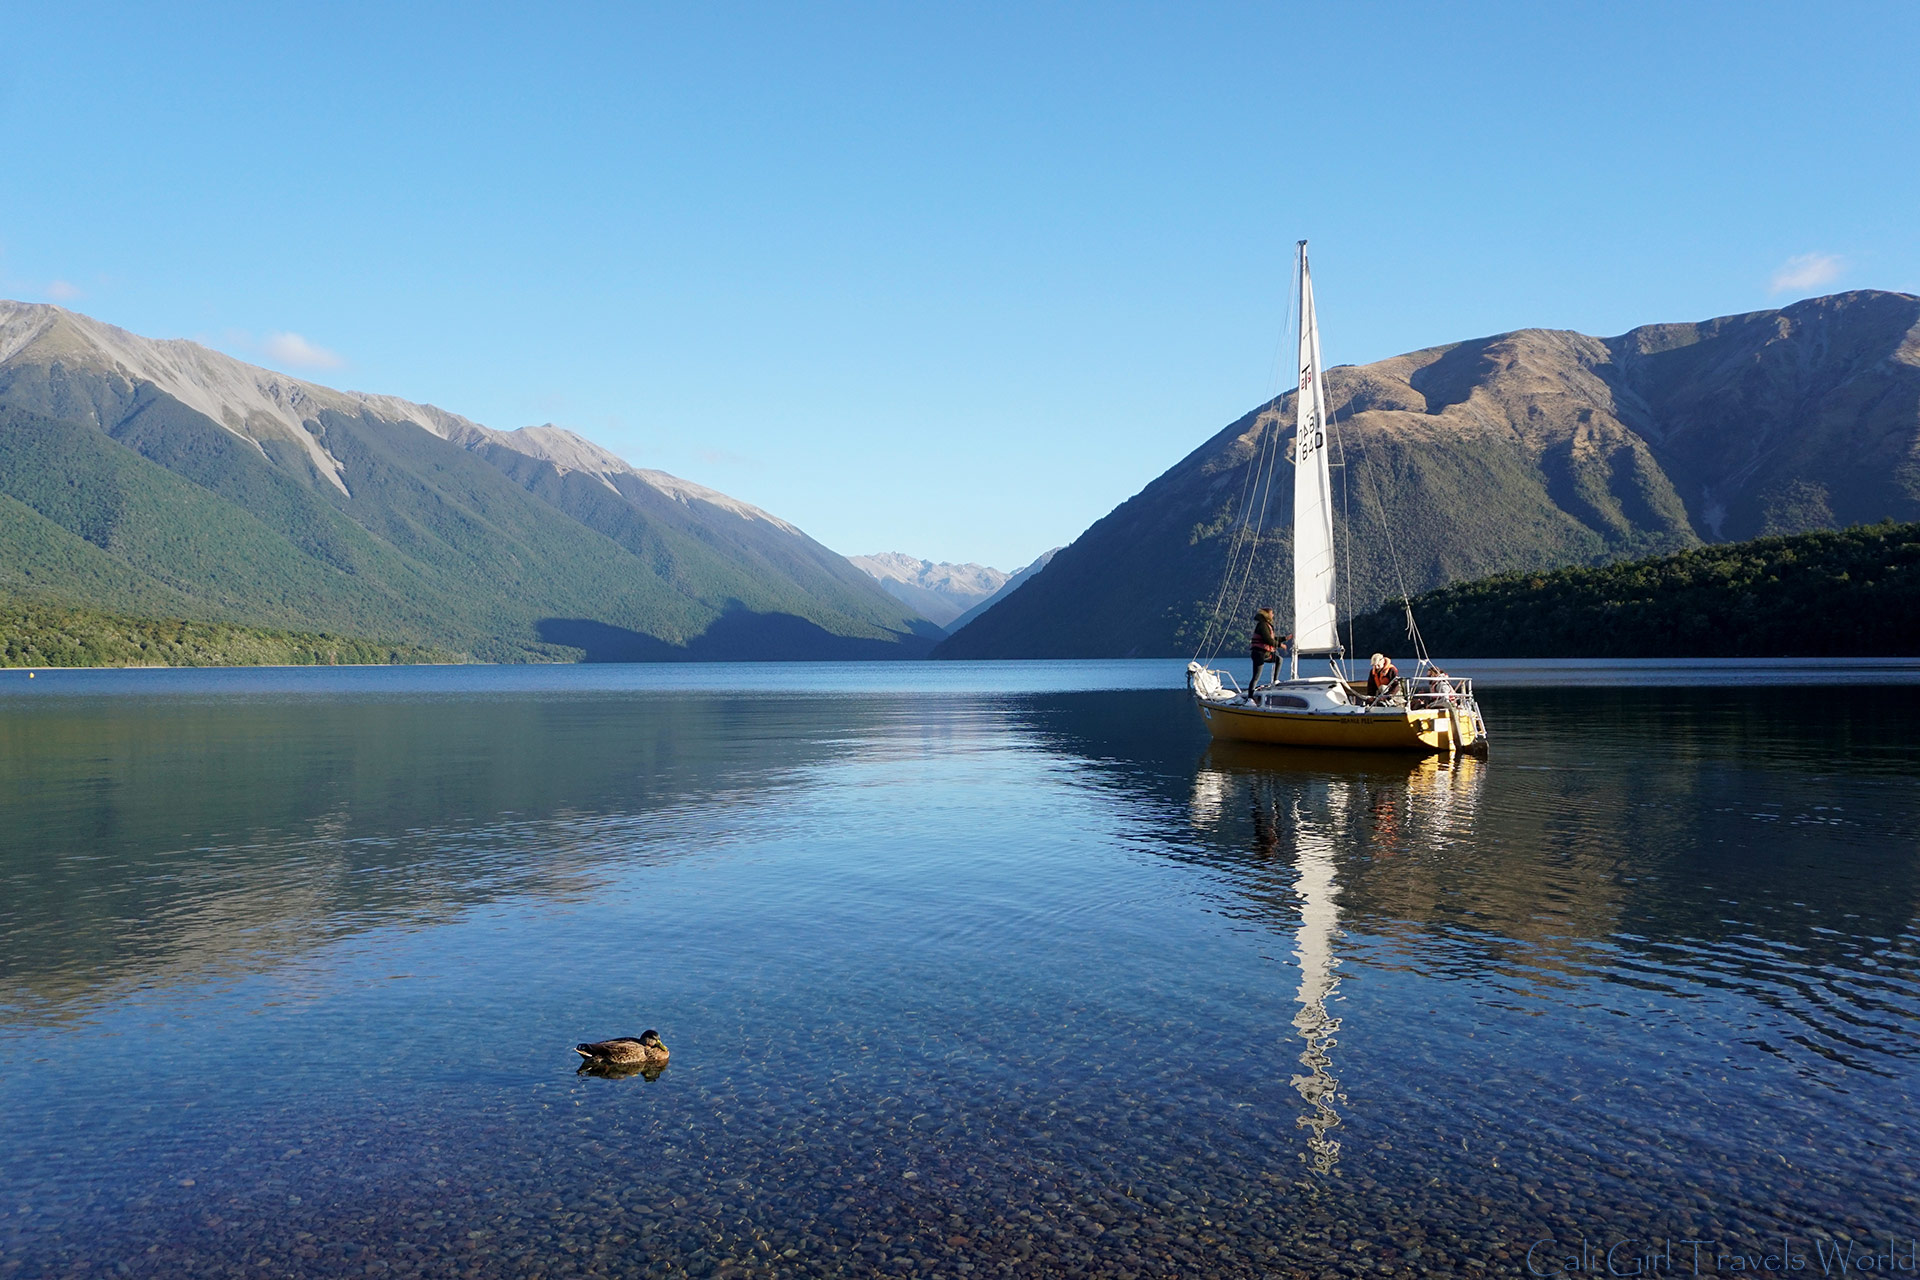 Looking out onto Rotoiti Lake watching a sail boat and a duck pass by the mountains in Nelson Lakes National Park in the South Island of New Zealand.